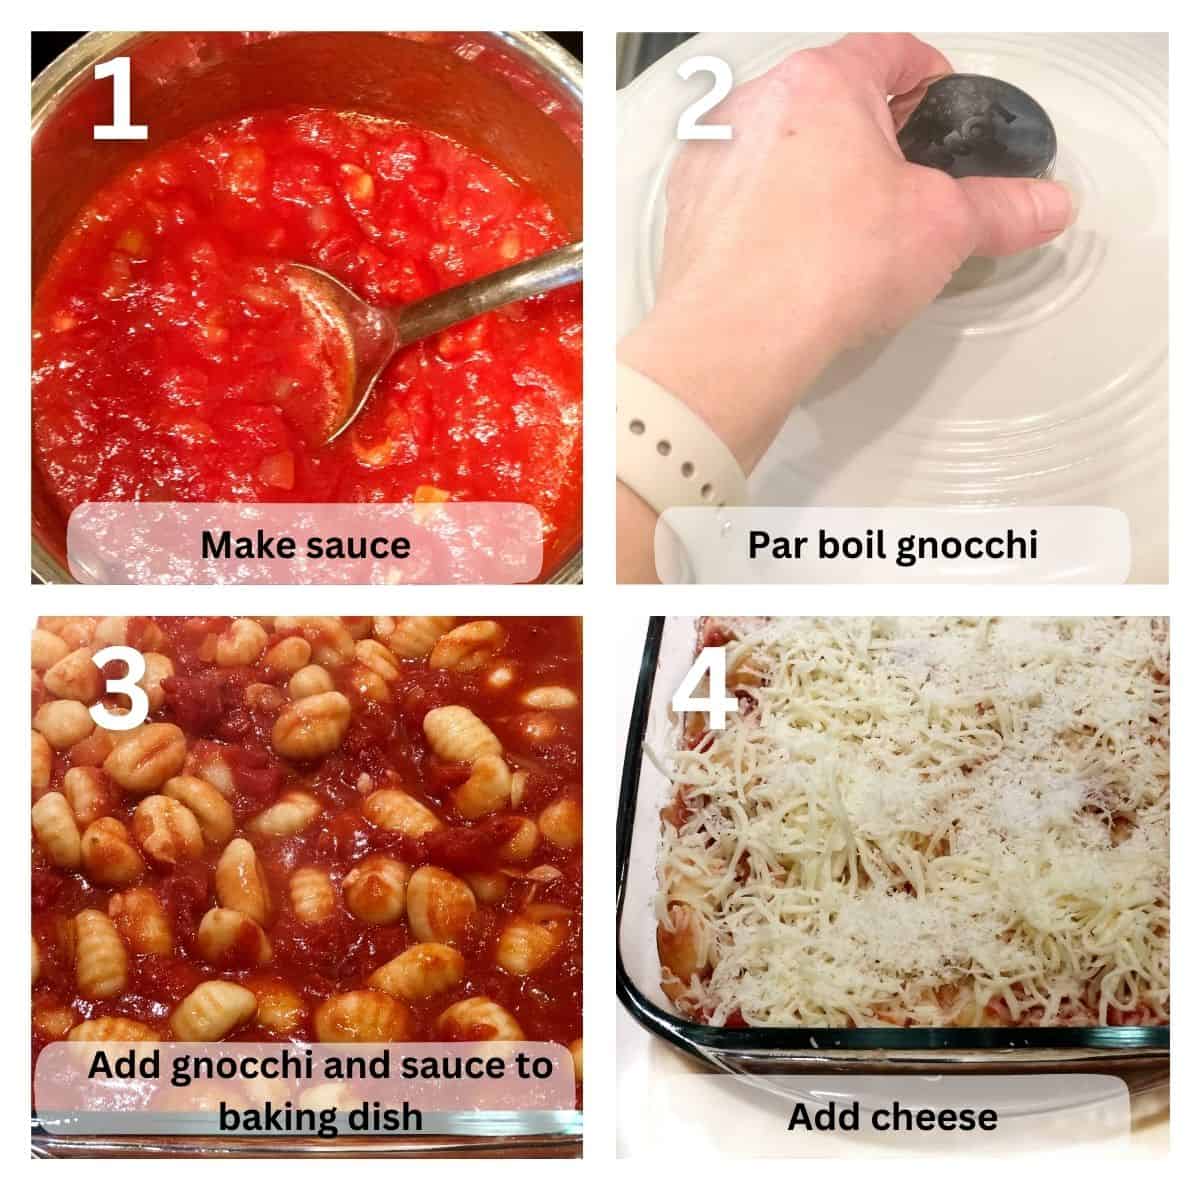 how to make gnocchi alla sorrentina step by step photos how to make it.